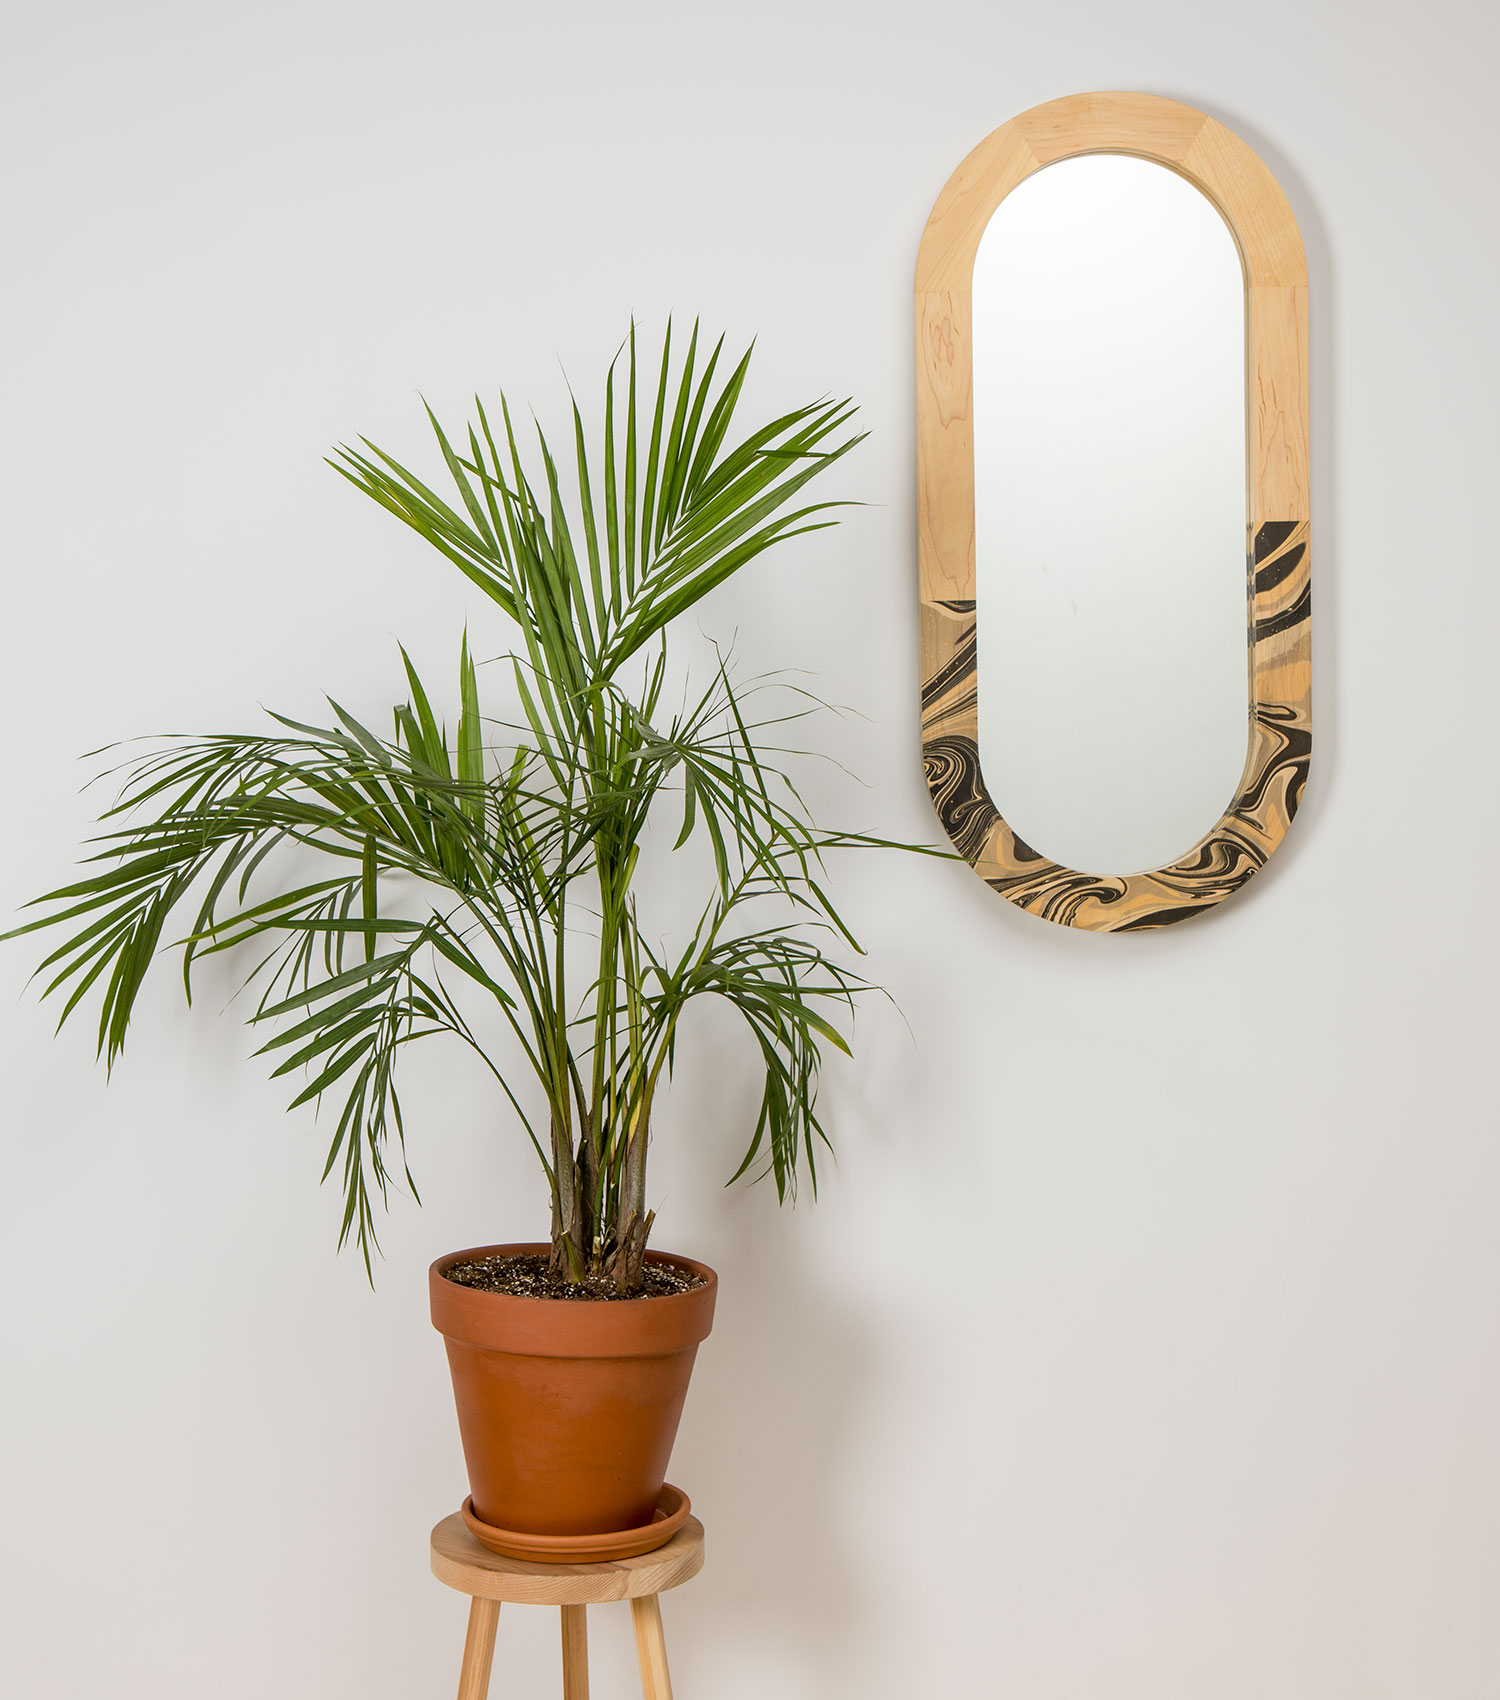 A beautiful wooden oval mirror with a palm tree. On mouseover: a handsome rectangular wooden-framed mirror with a marbled finish.